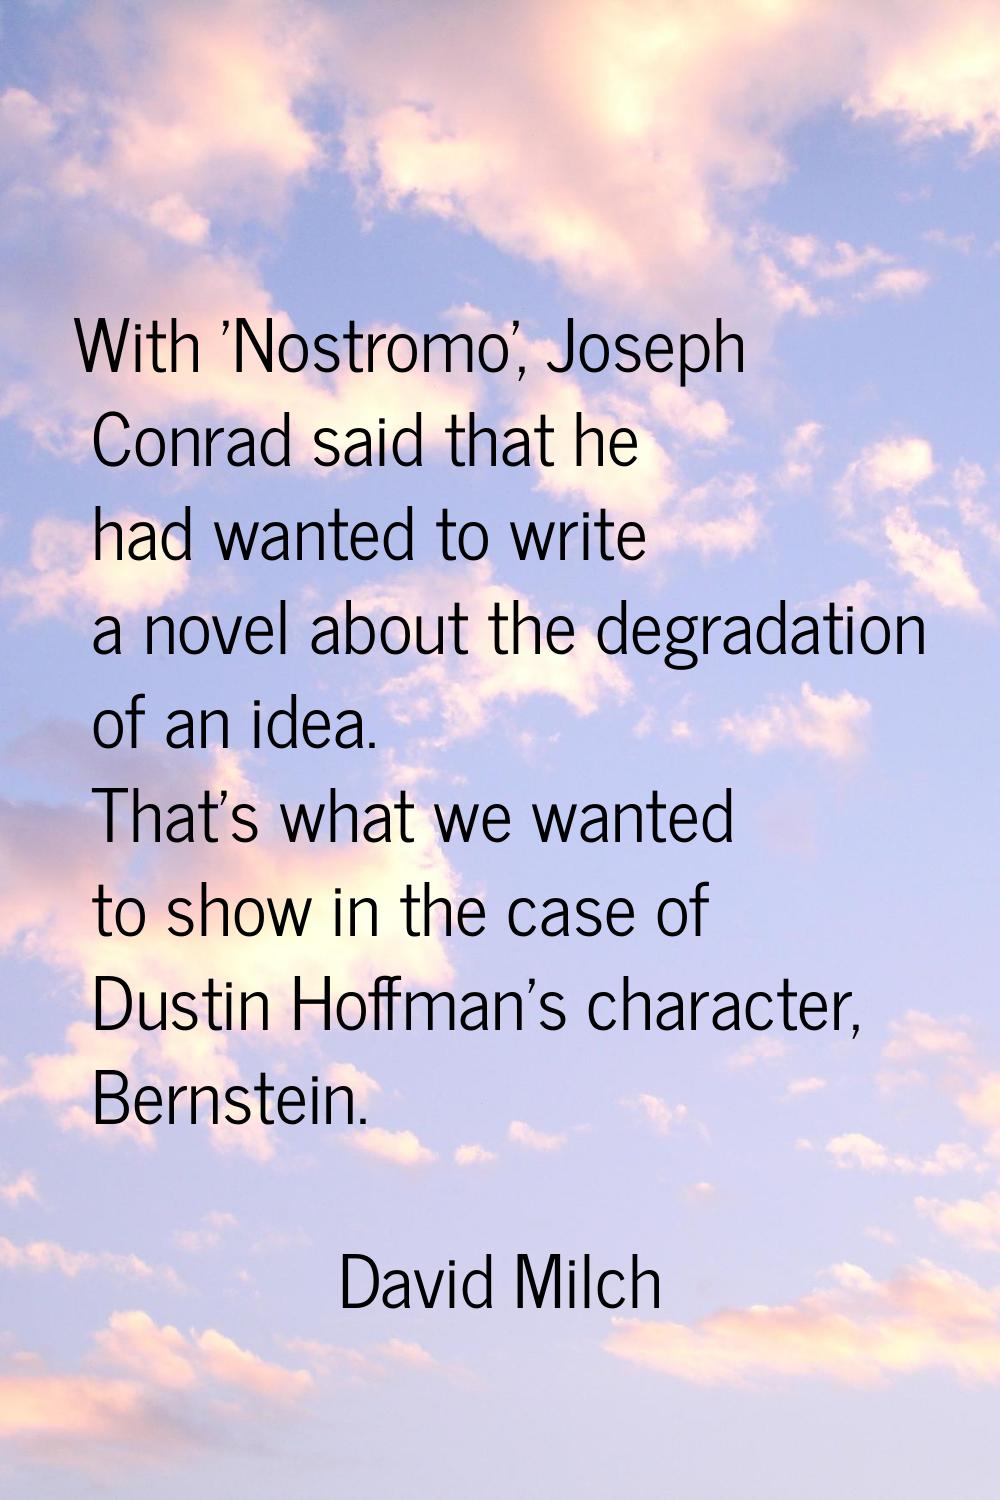 With 'Nostromo', Joseph Conrad said that he had wanted to write a novel about the degradation of an